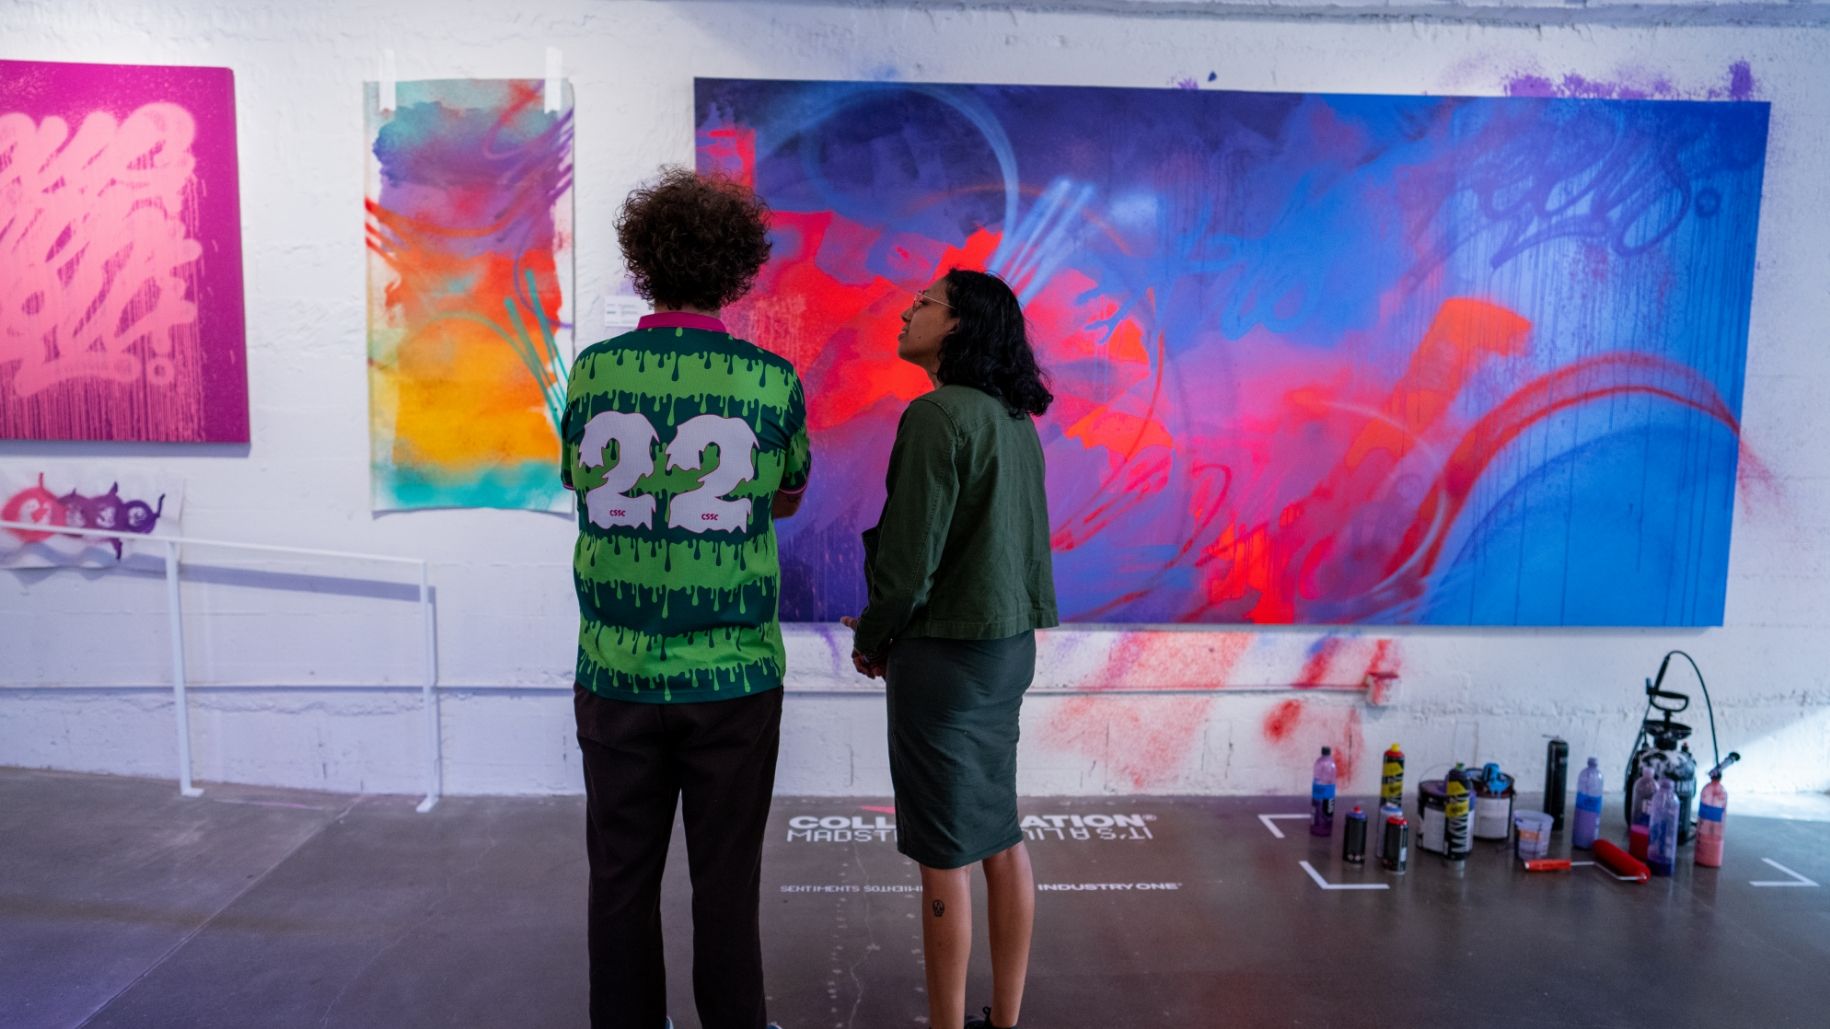 2 people stand in front of large brightly colored abstract painting